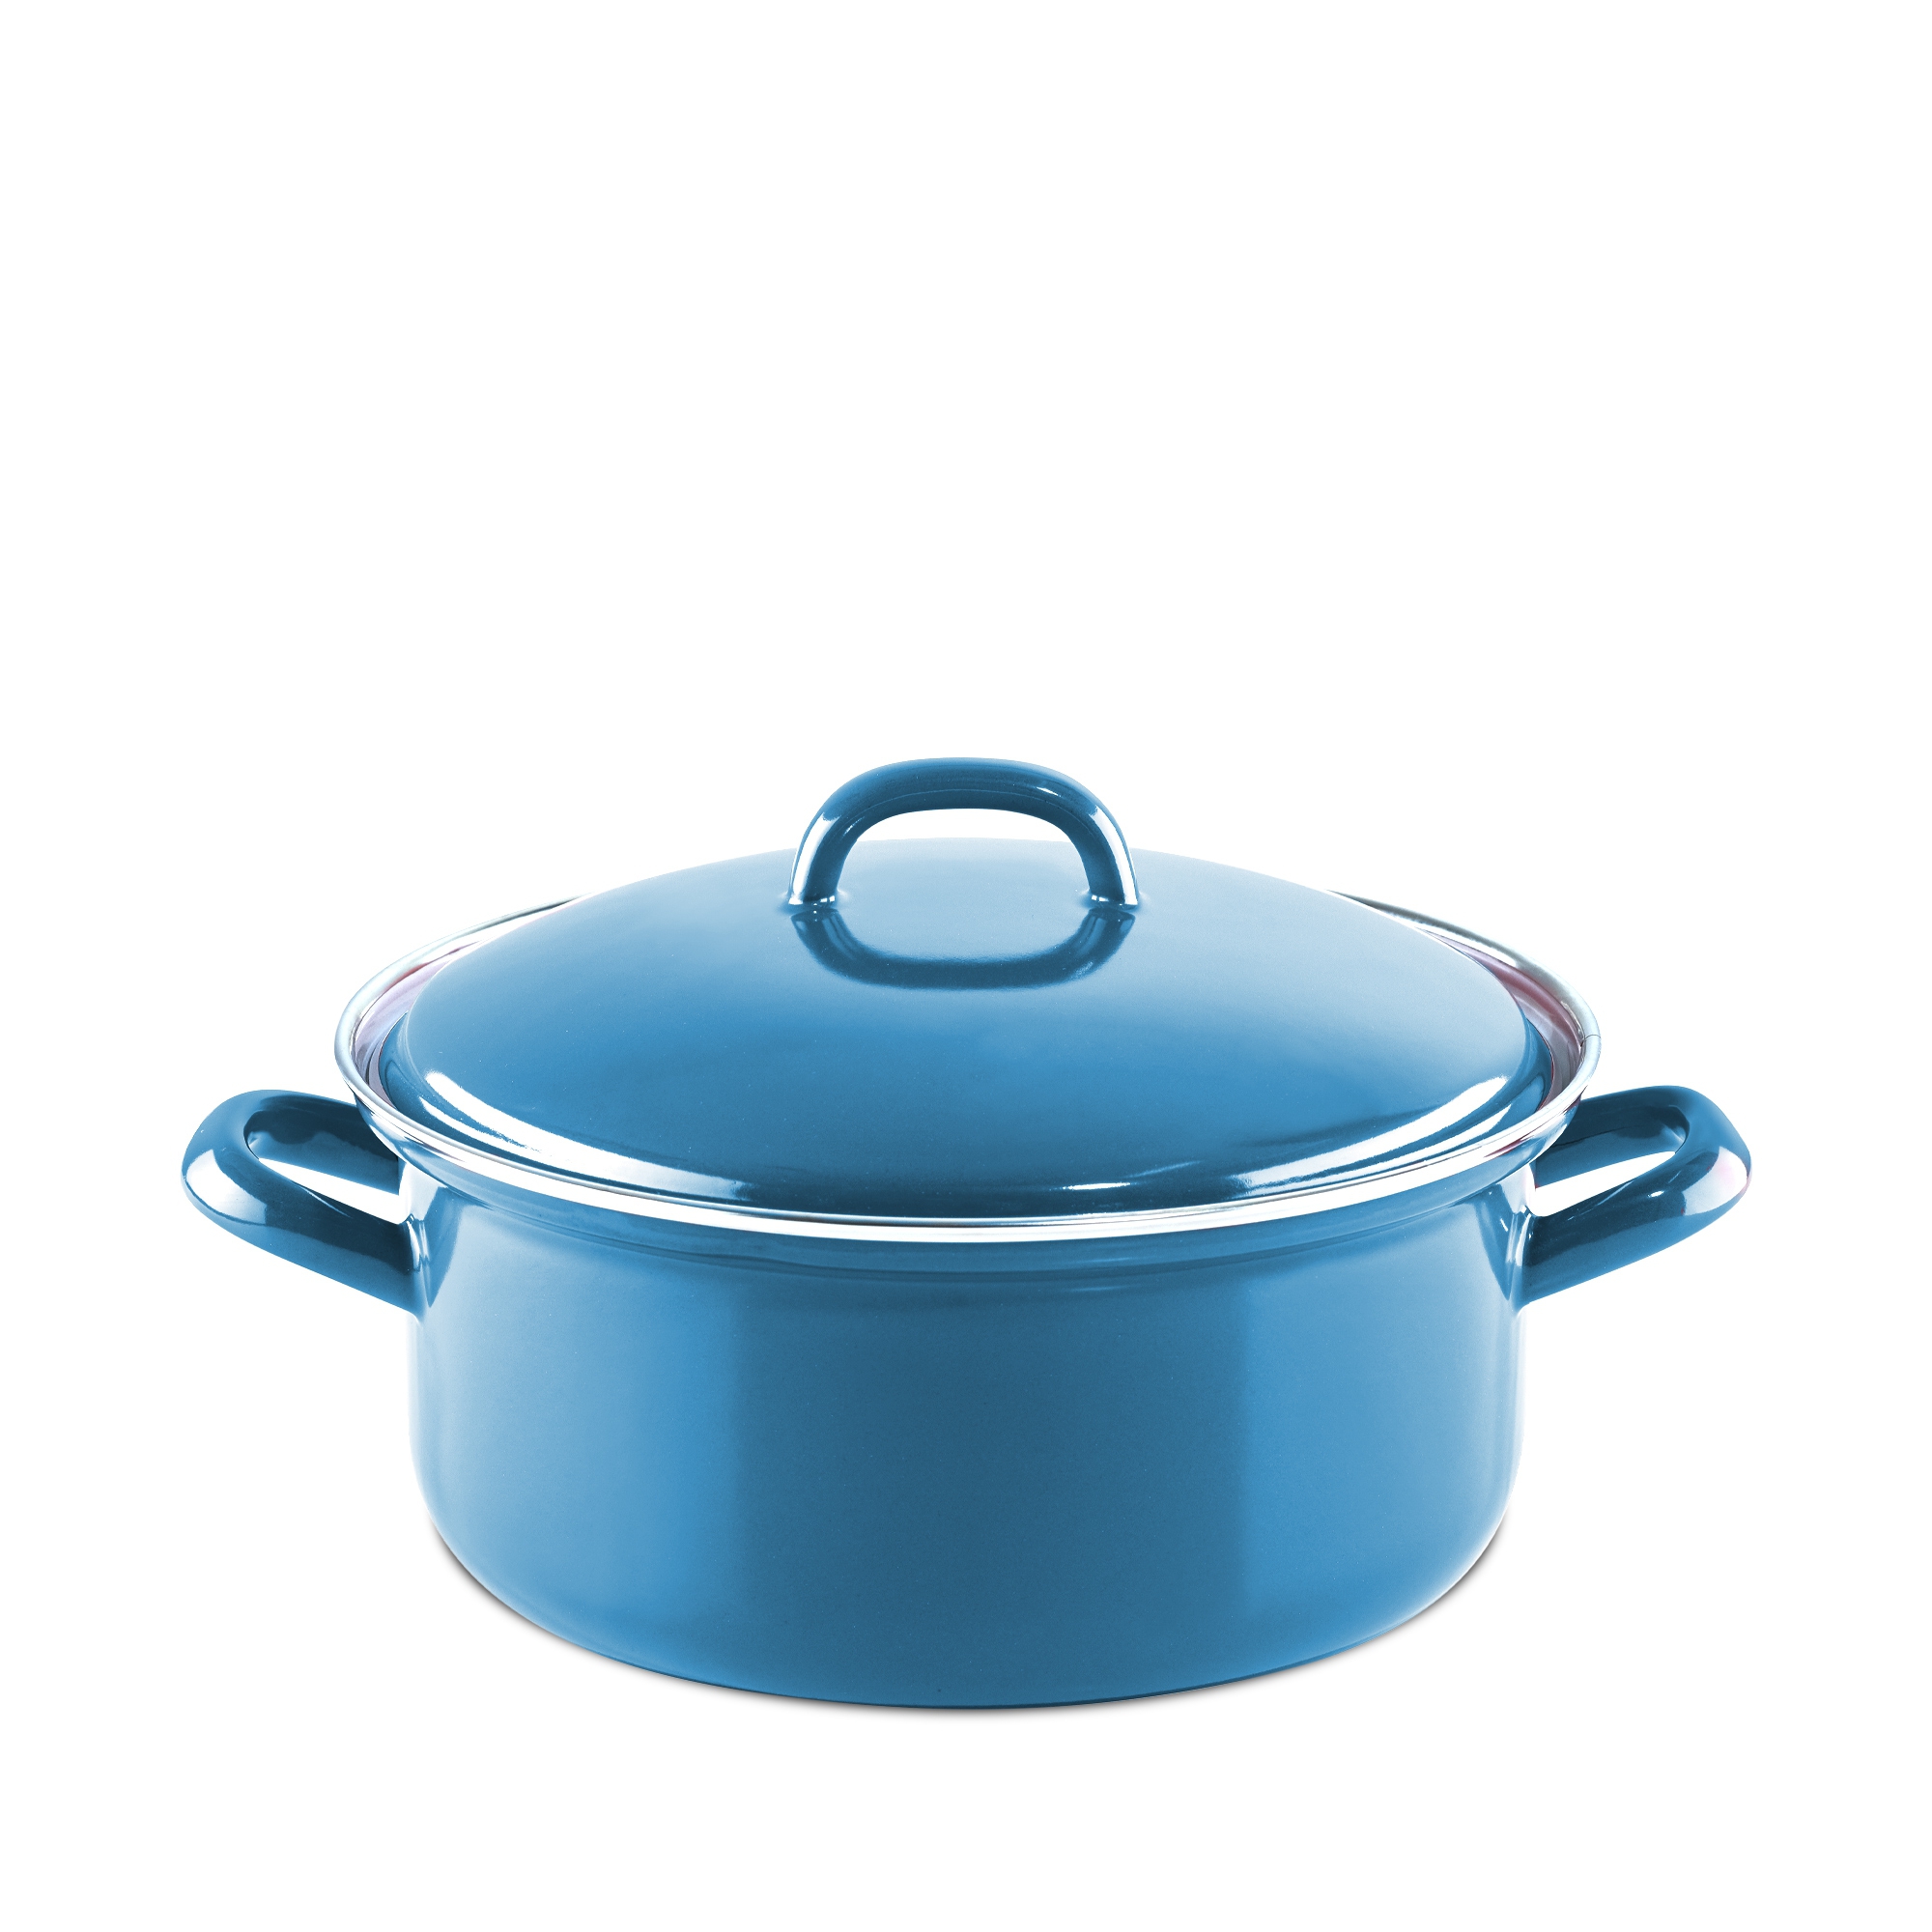 Riess CLASSIC - Casserole dish with lid Blue 20 cm